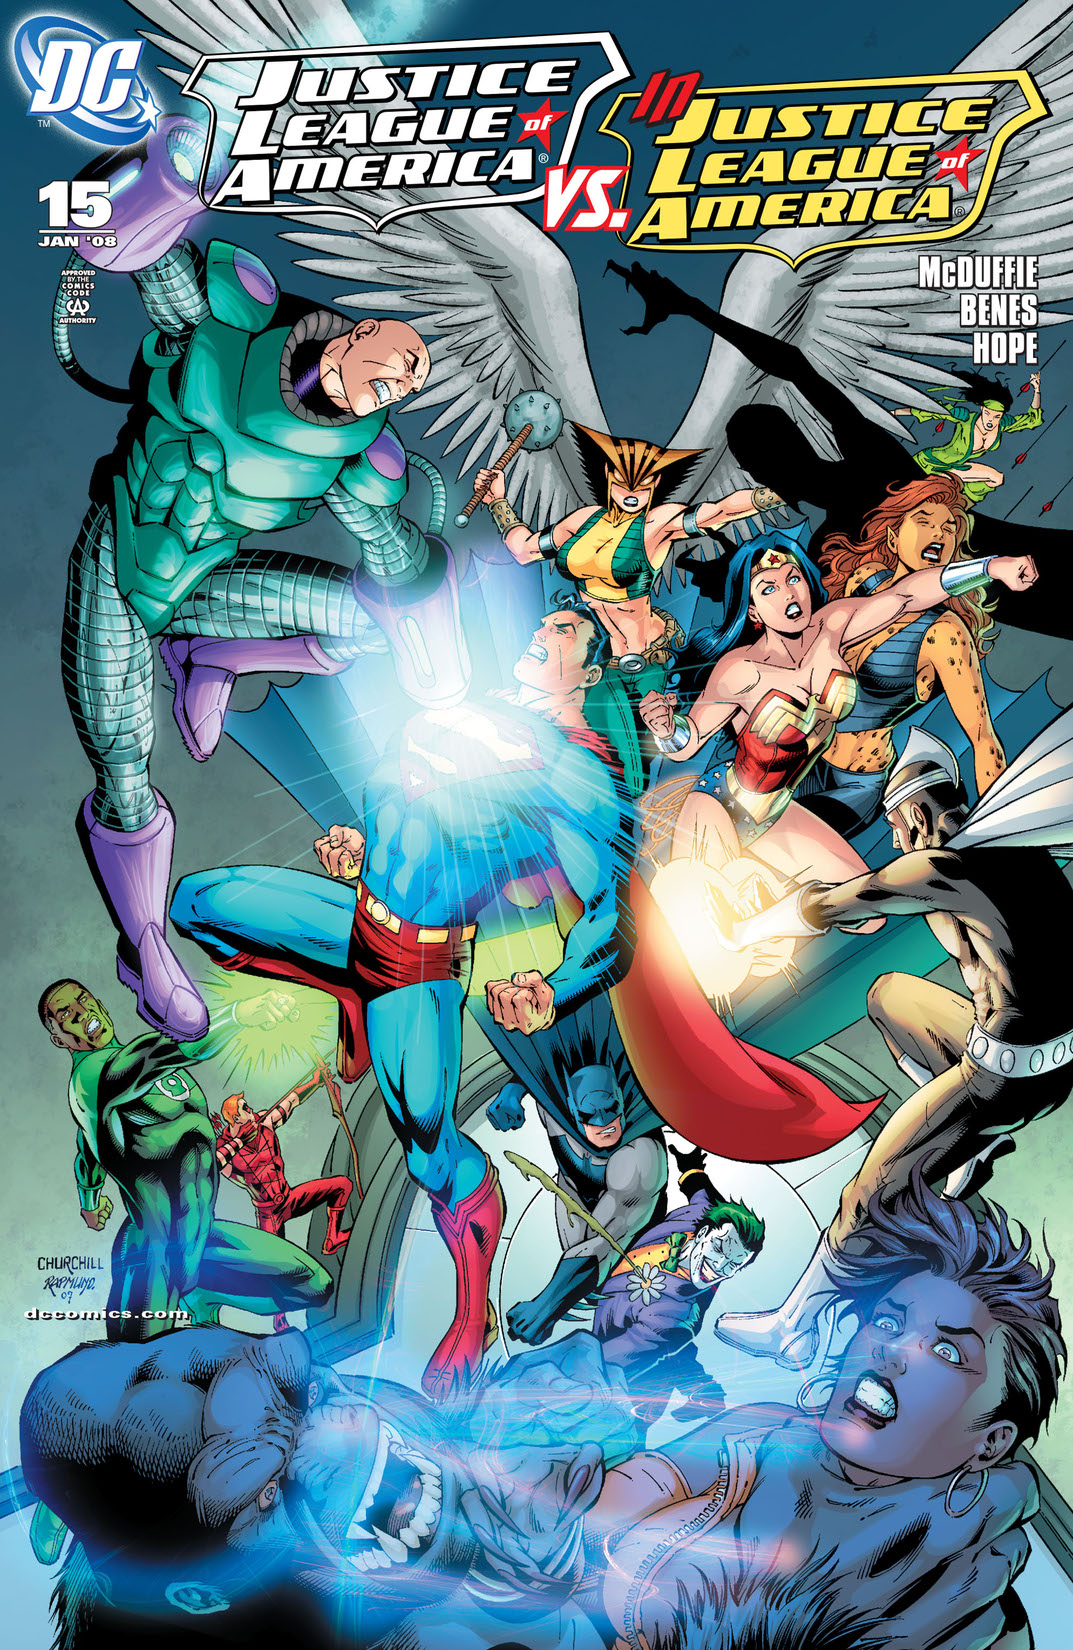 Justice League of America (2006-) #15 preview images